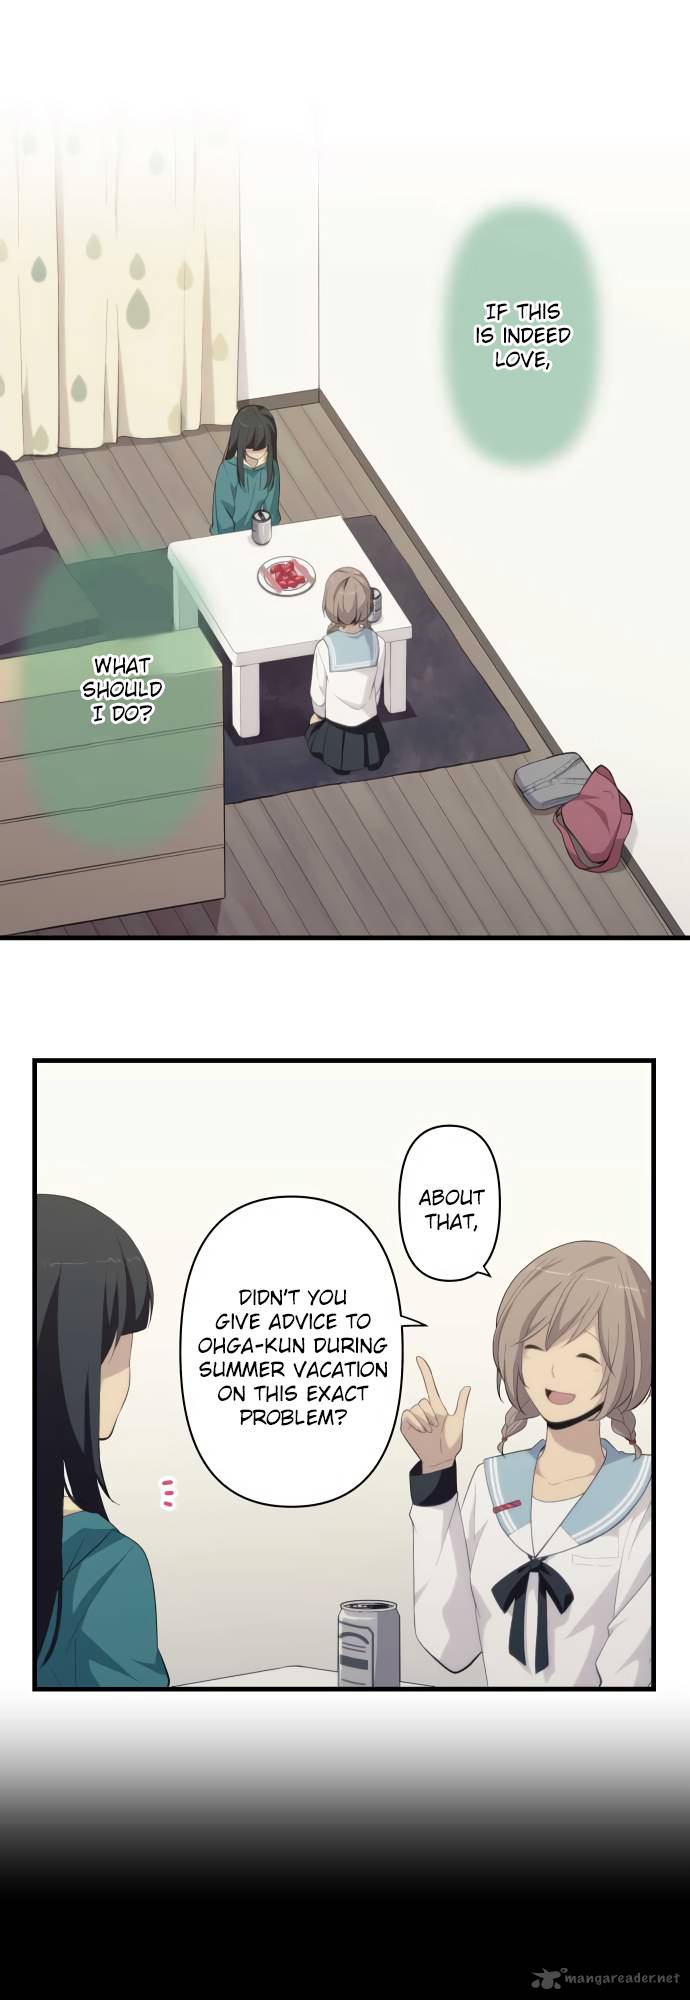 relife_181_1